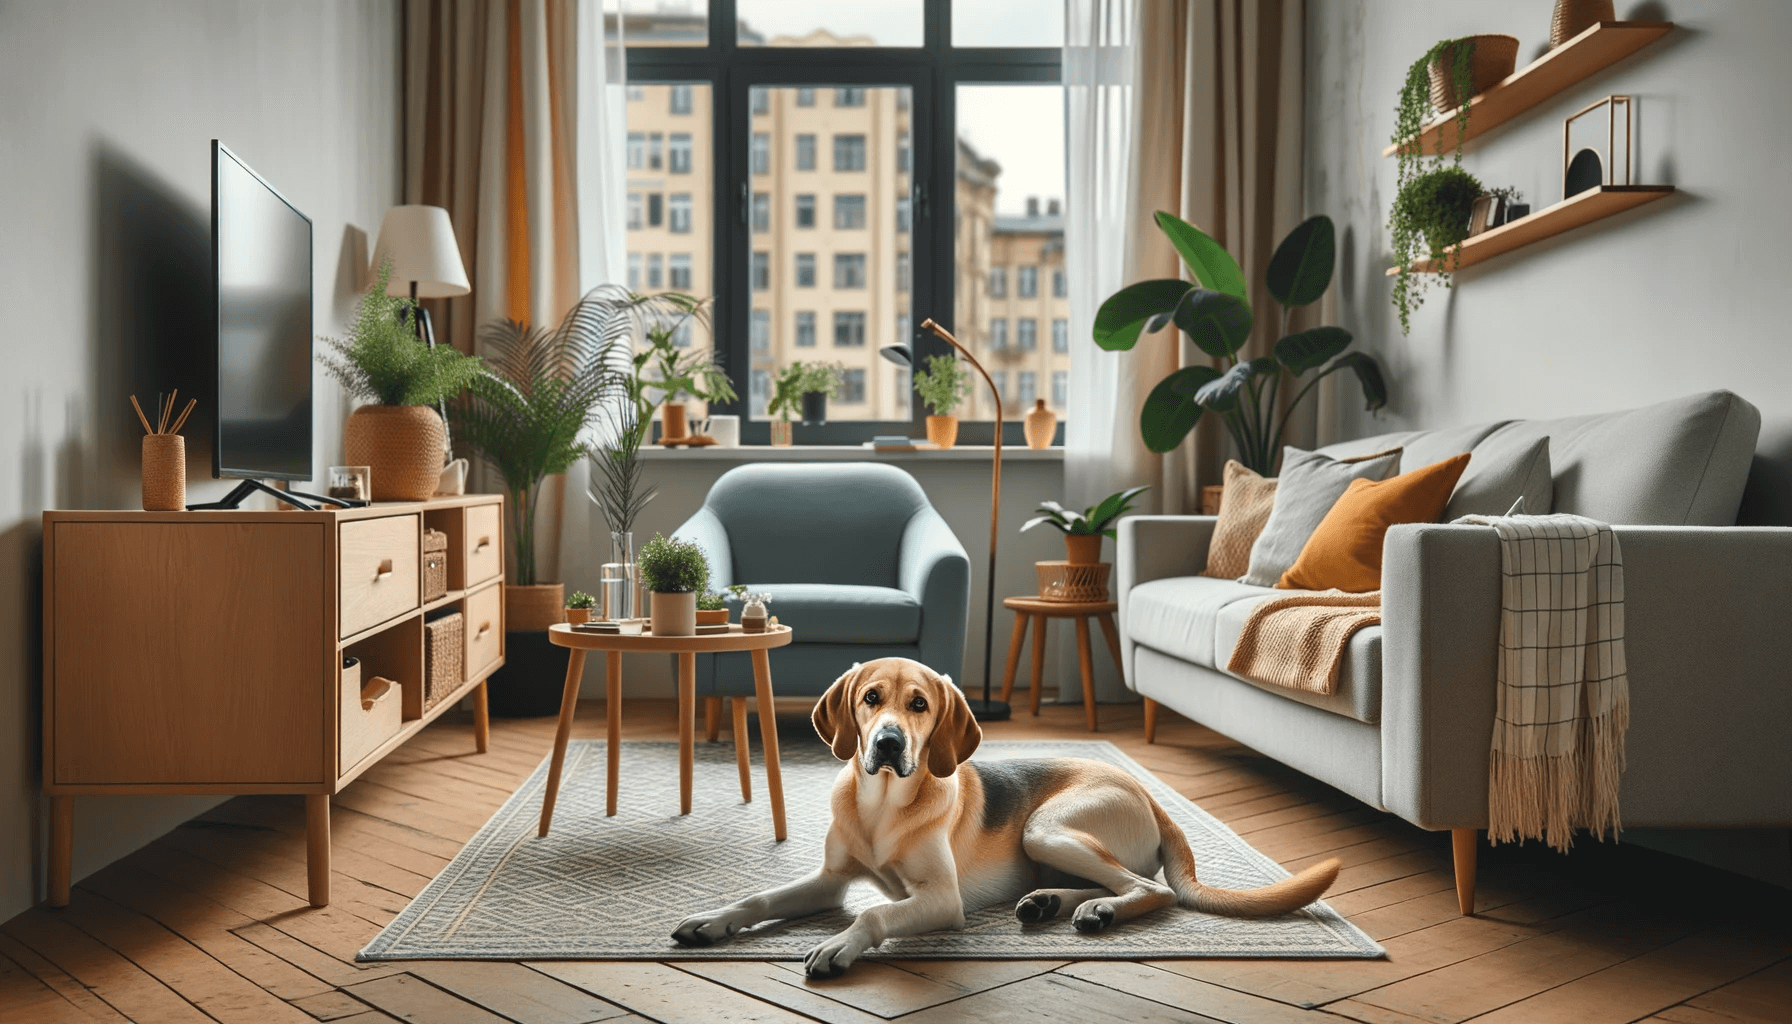 A Lab Hound Mix comfortably lounging in a small apartment setting, looking completely at ease